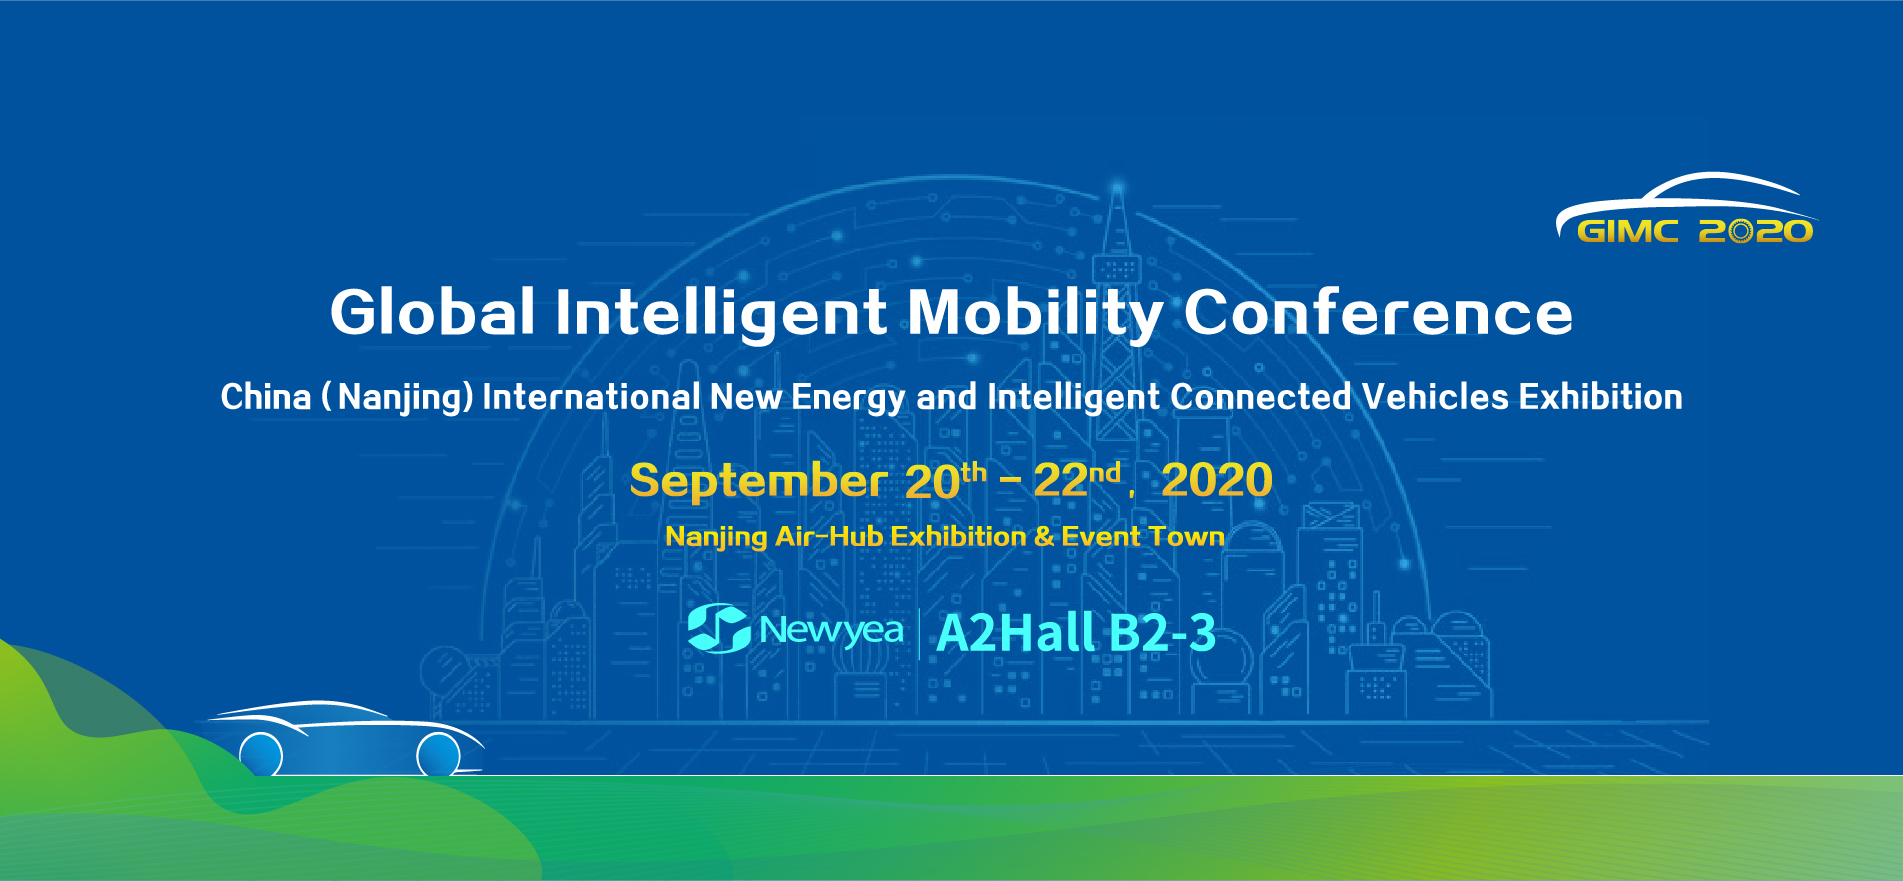 Global Intelligent Mobility Conference